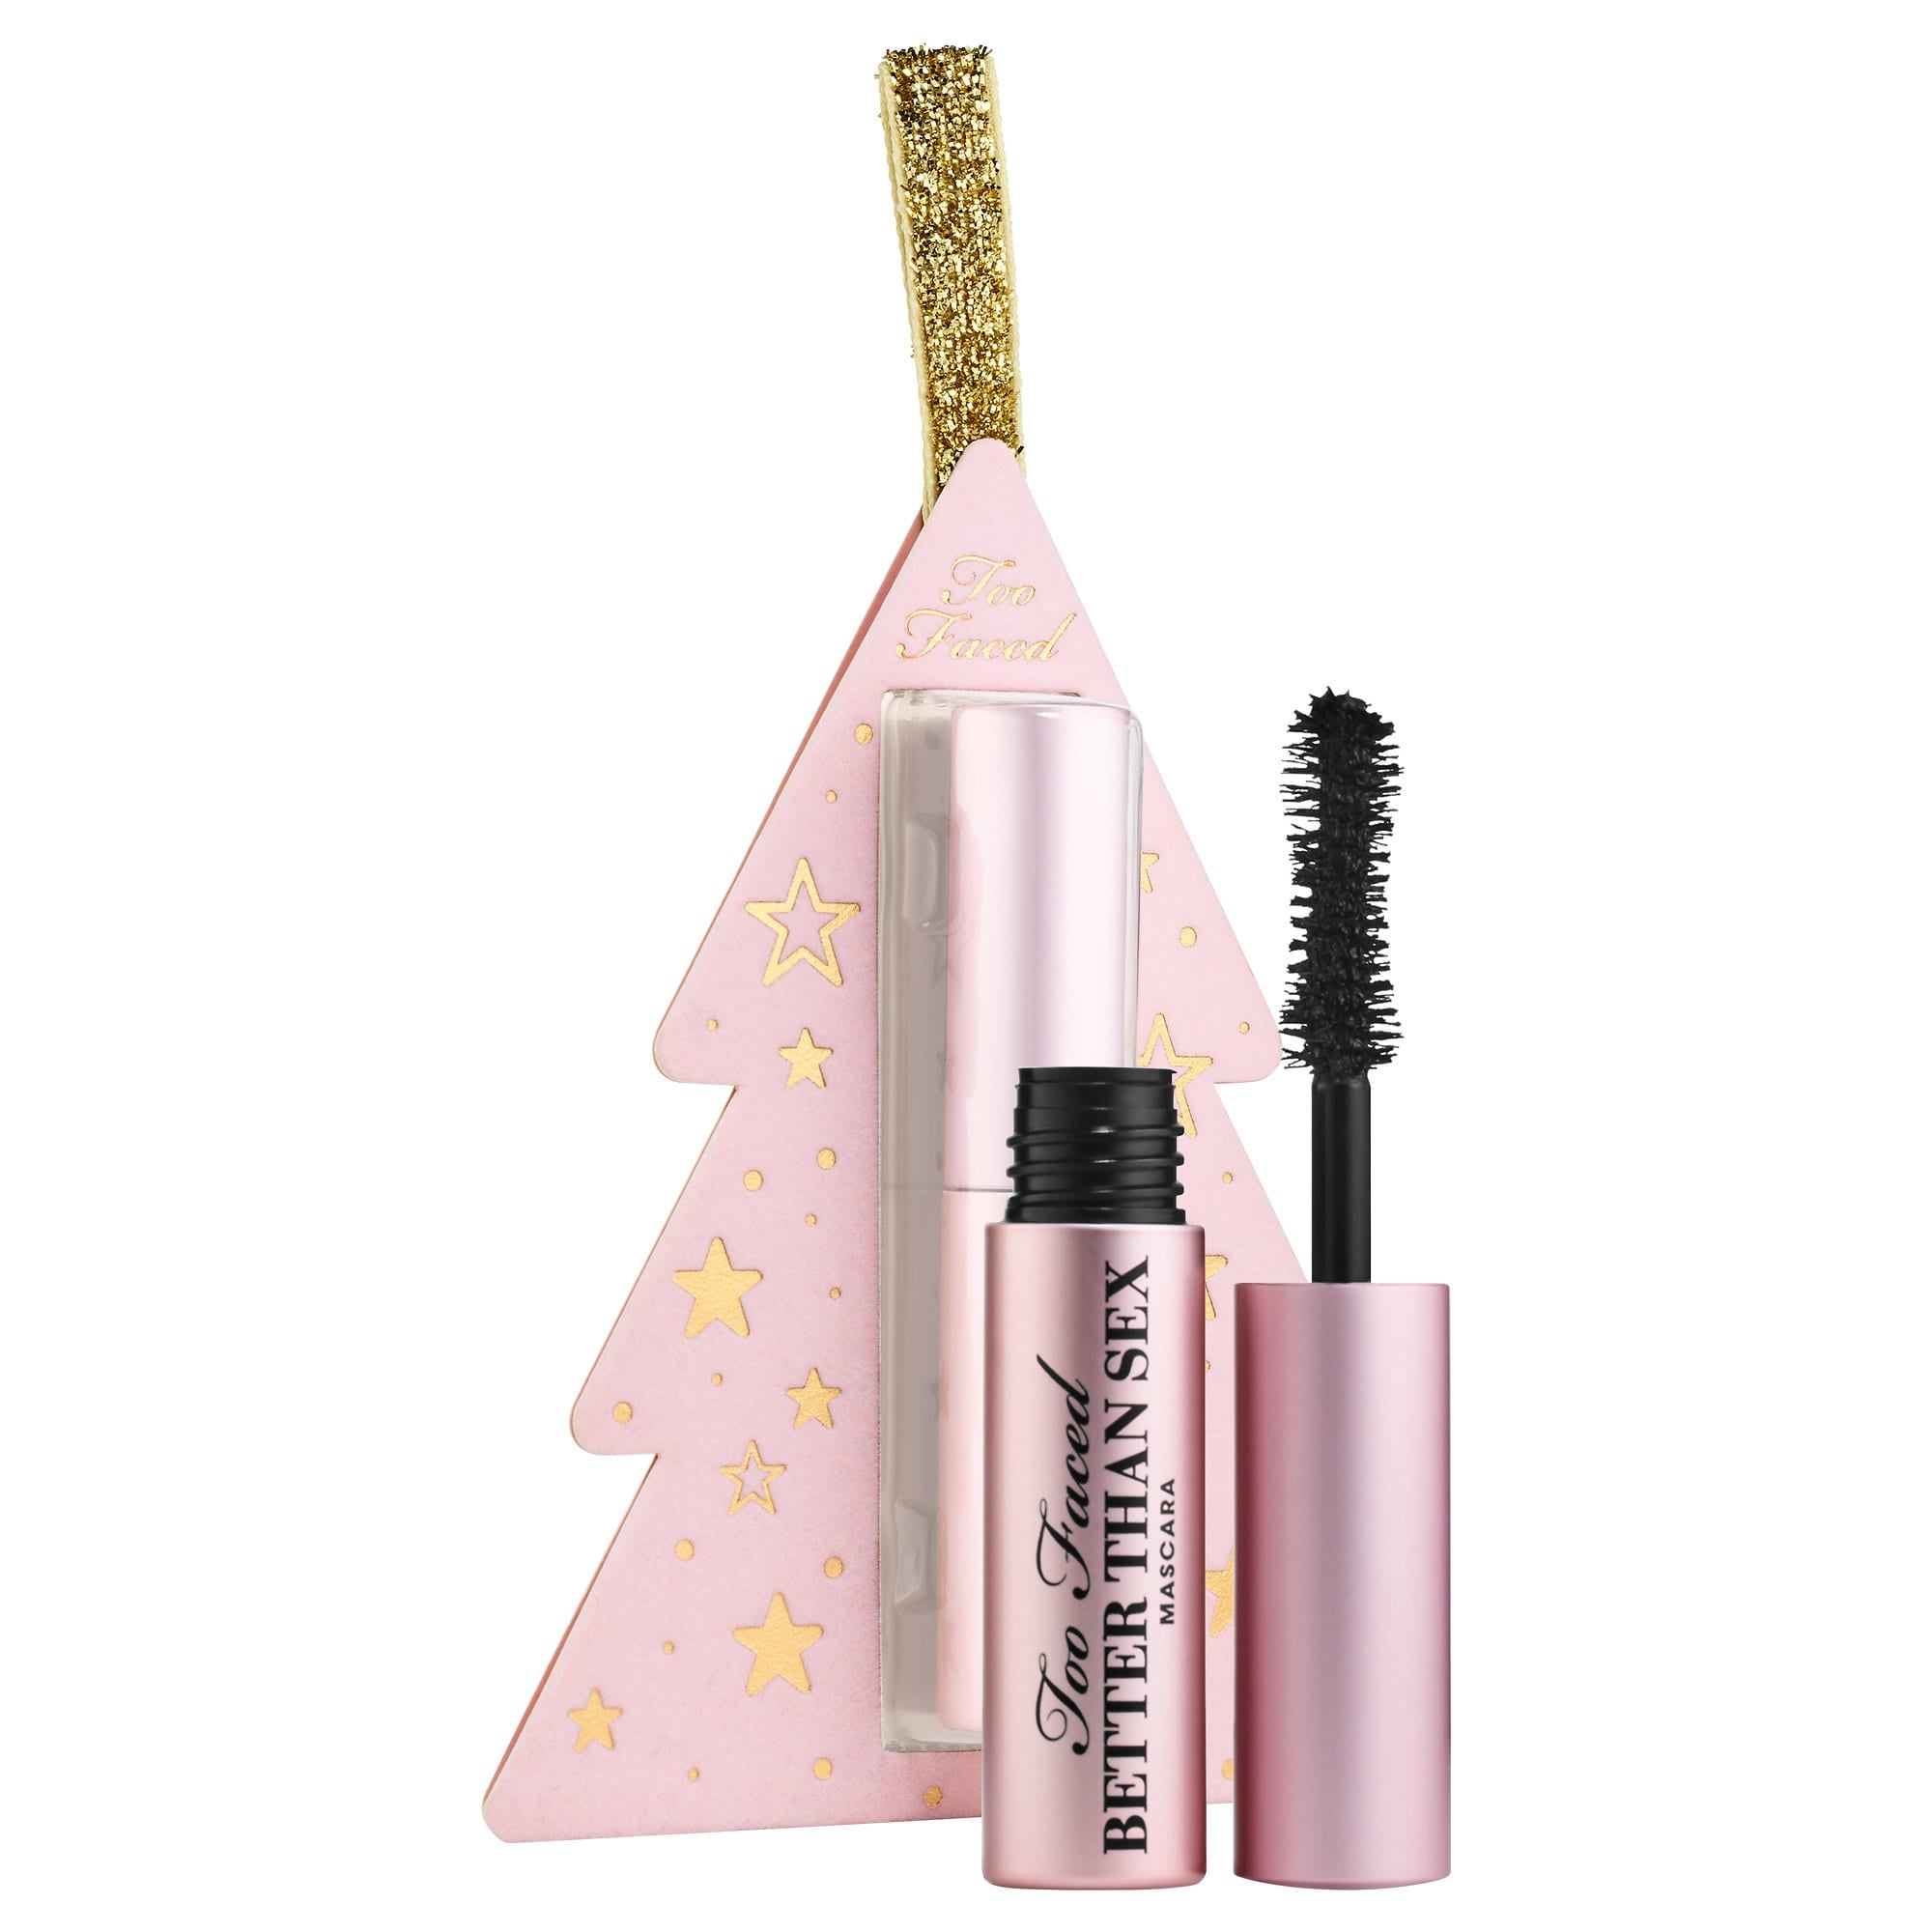 Too Faced Better Than Sex Mascara Mini Ornament 9 Beauty Your Most Gorgeous Ever | POPSUGAR Beauty Photo 10